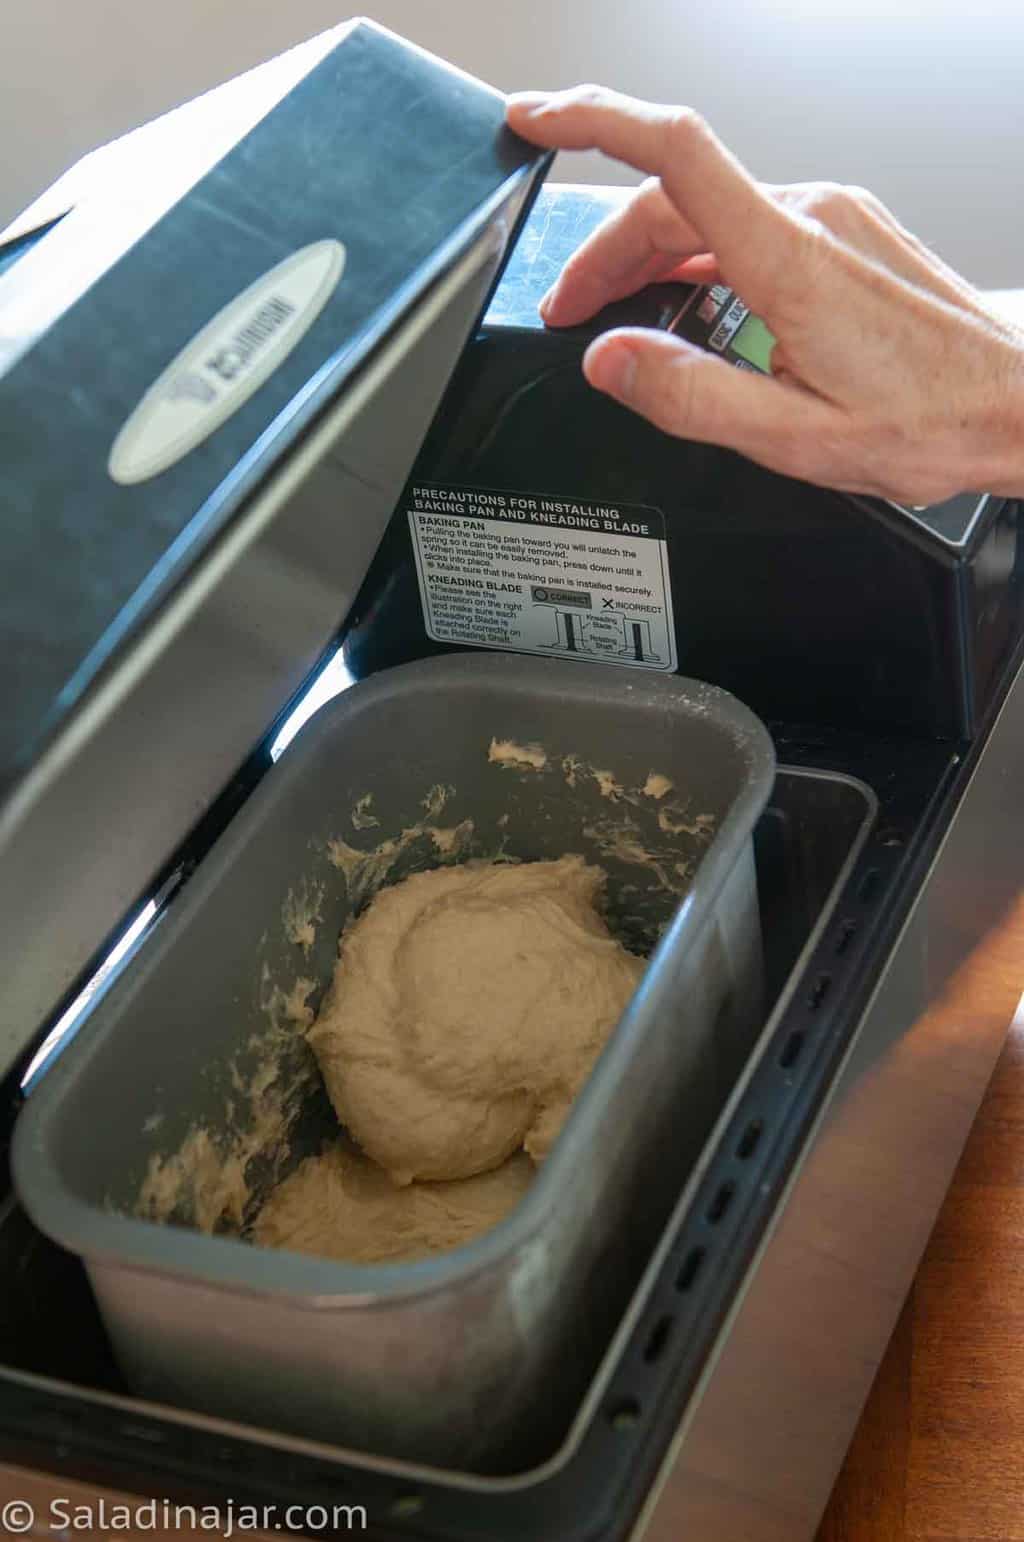 Opening the lid of a bread machine to check the consistency of the dough